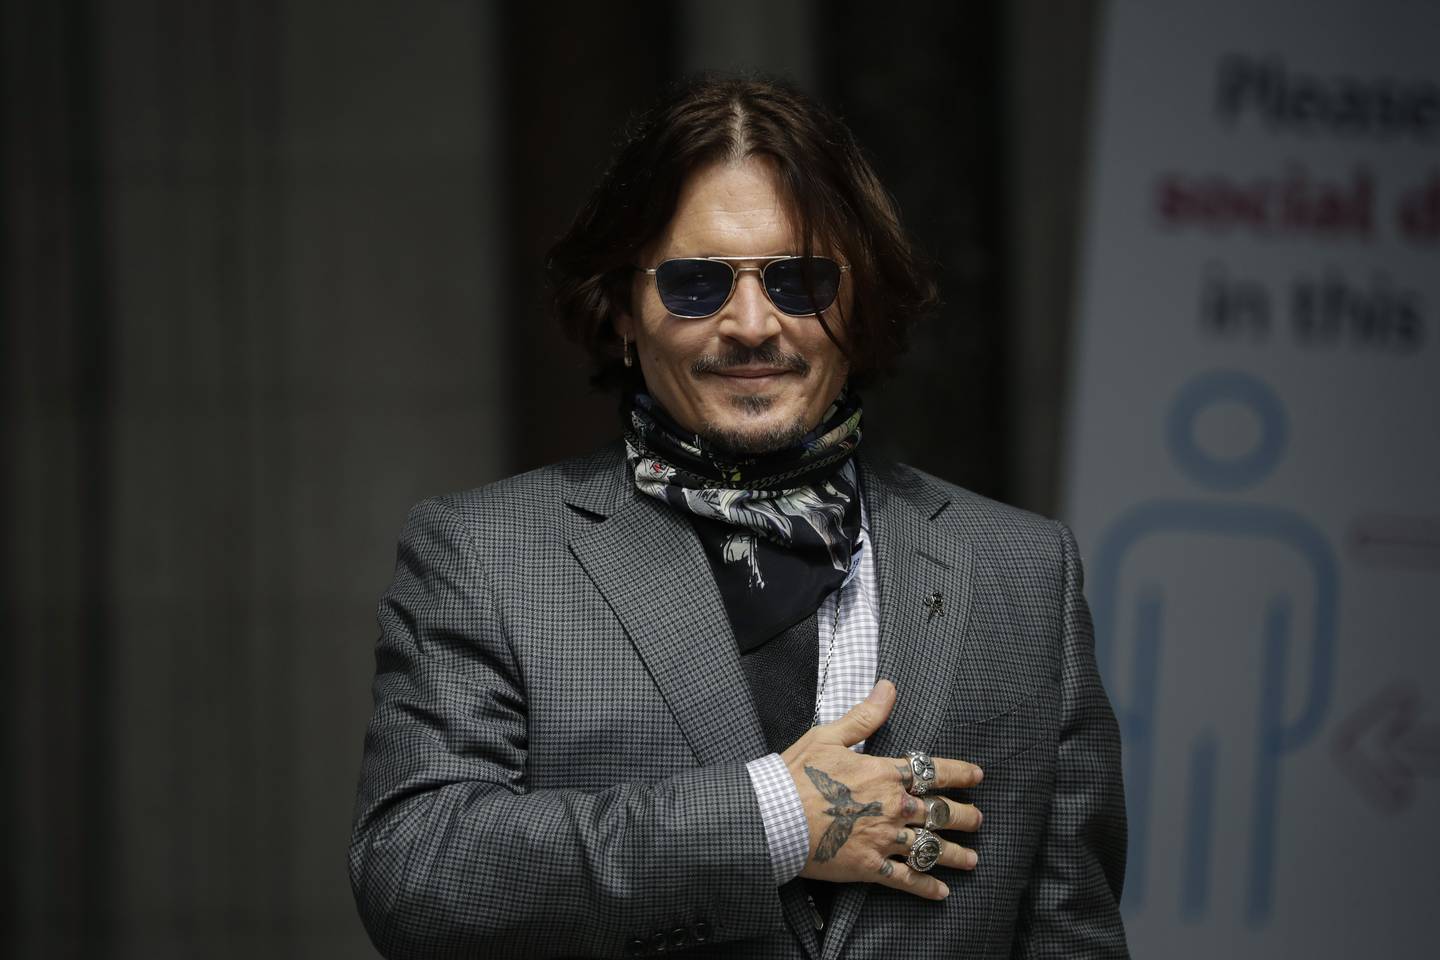 Johnny Depp arrives at the High Court in London in July 2020. AP Photo